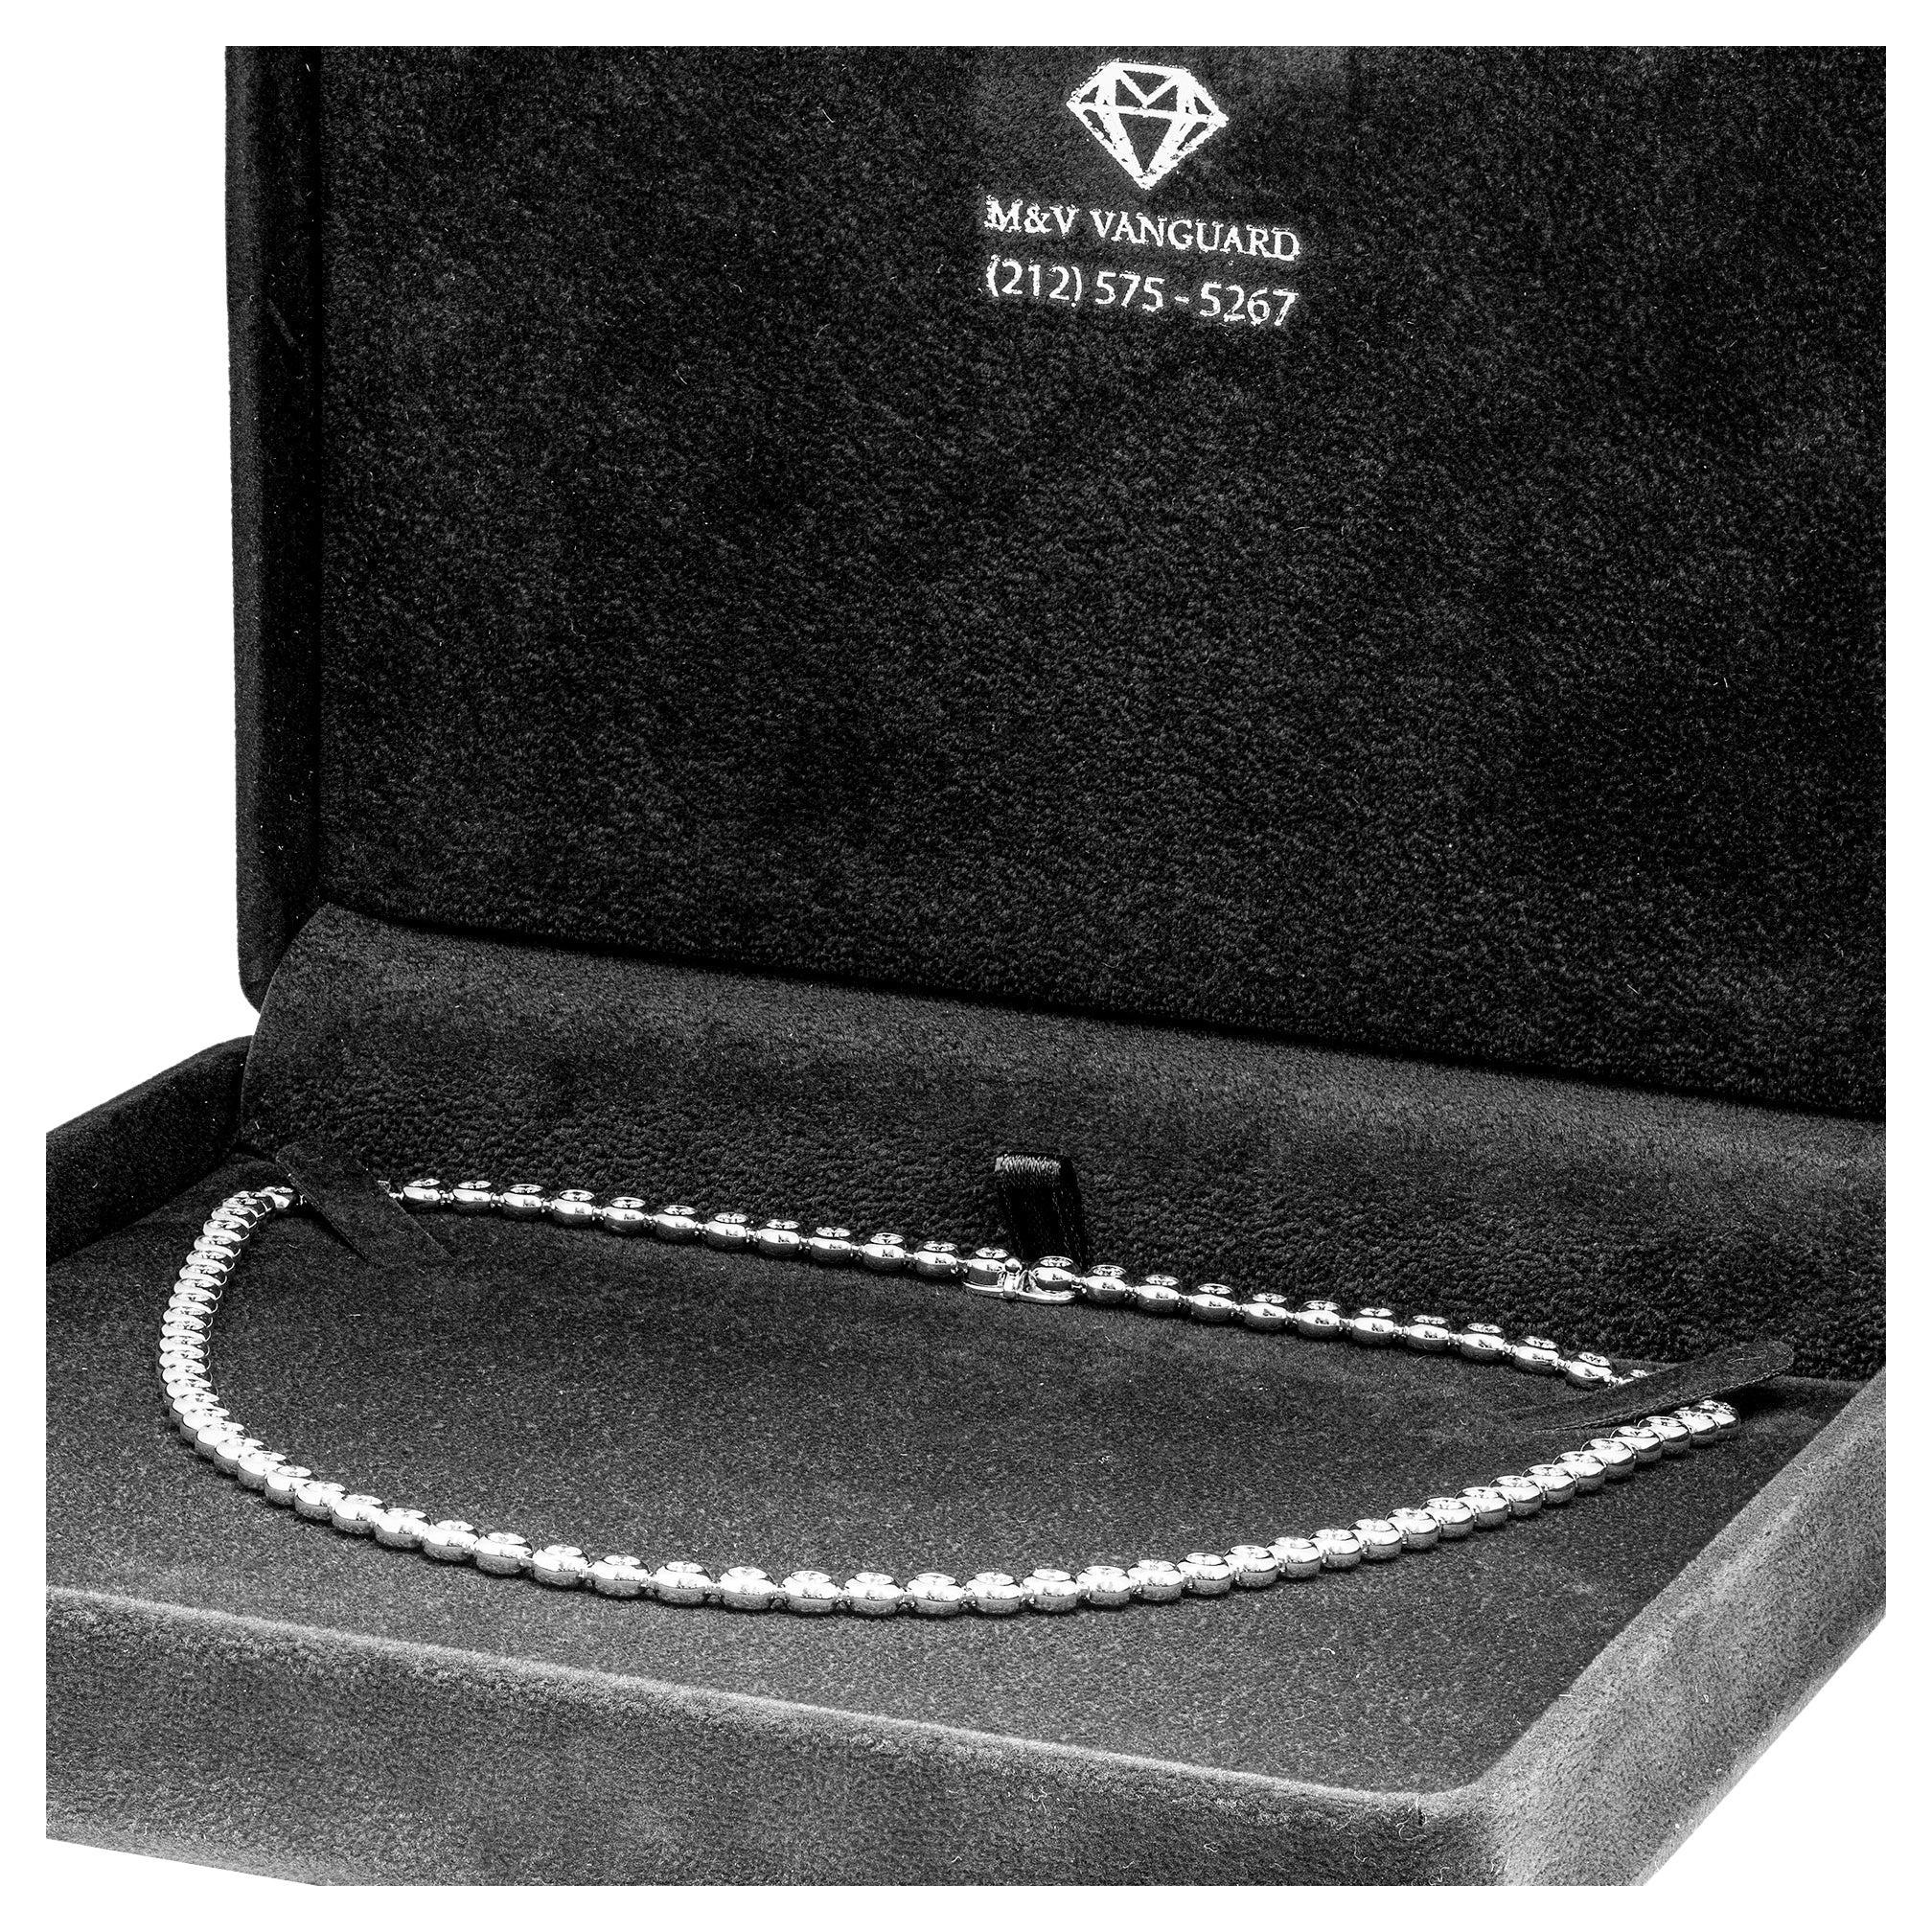  Diamond bezel set Tennis Necklace in Platinum 950
76 round diamonds F/G Color VS Clarity 
Total Length: 17.50 inches 
Total Carat Weight: 8.17ct (3.0mm each stone)